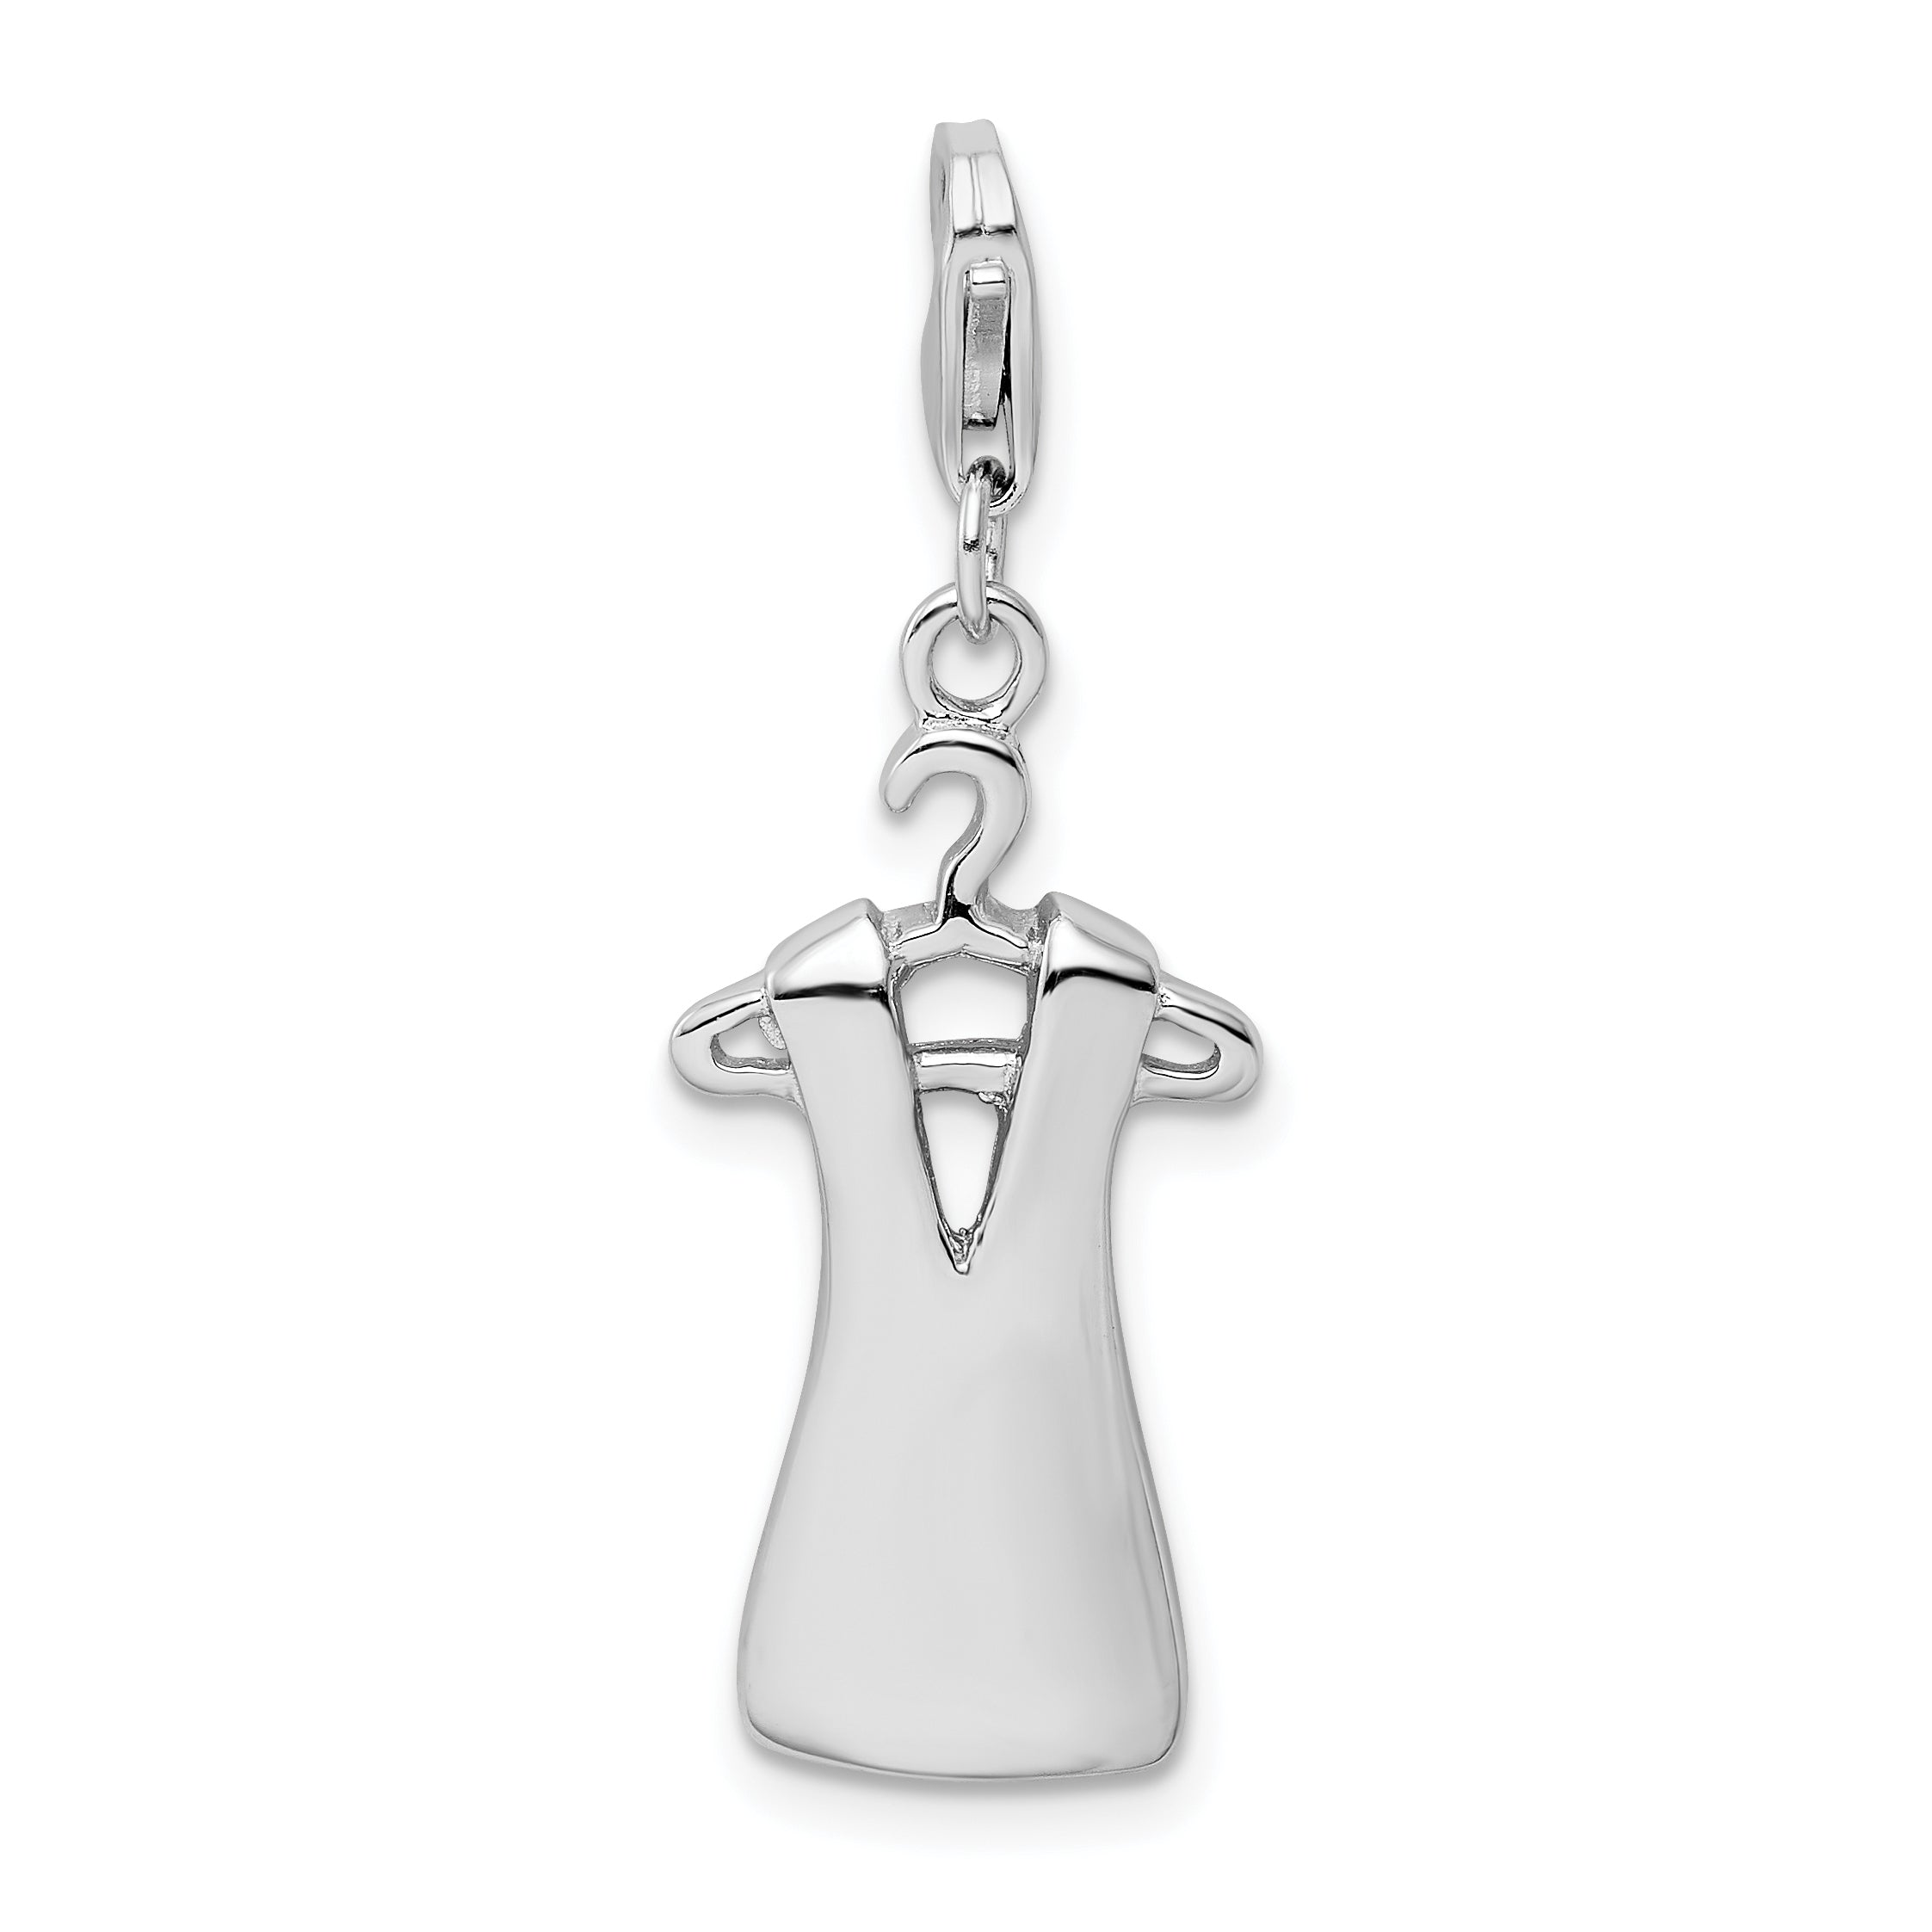 Amore La Vita Sterling Silver Rhodium-plated Polished Open Back Dress on Hanger Charm w/Lobster Clasp